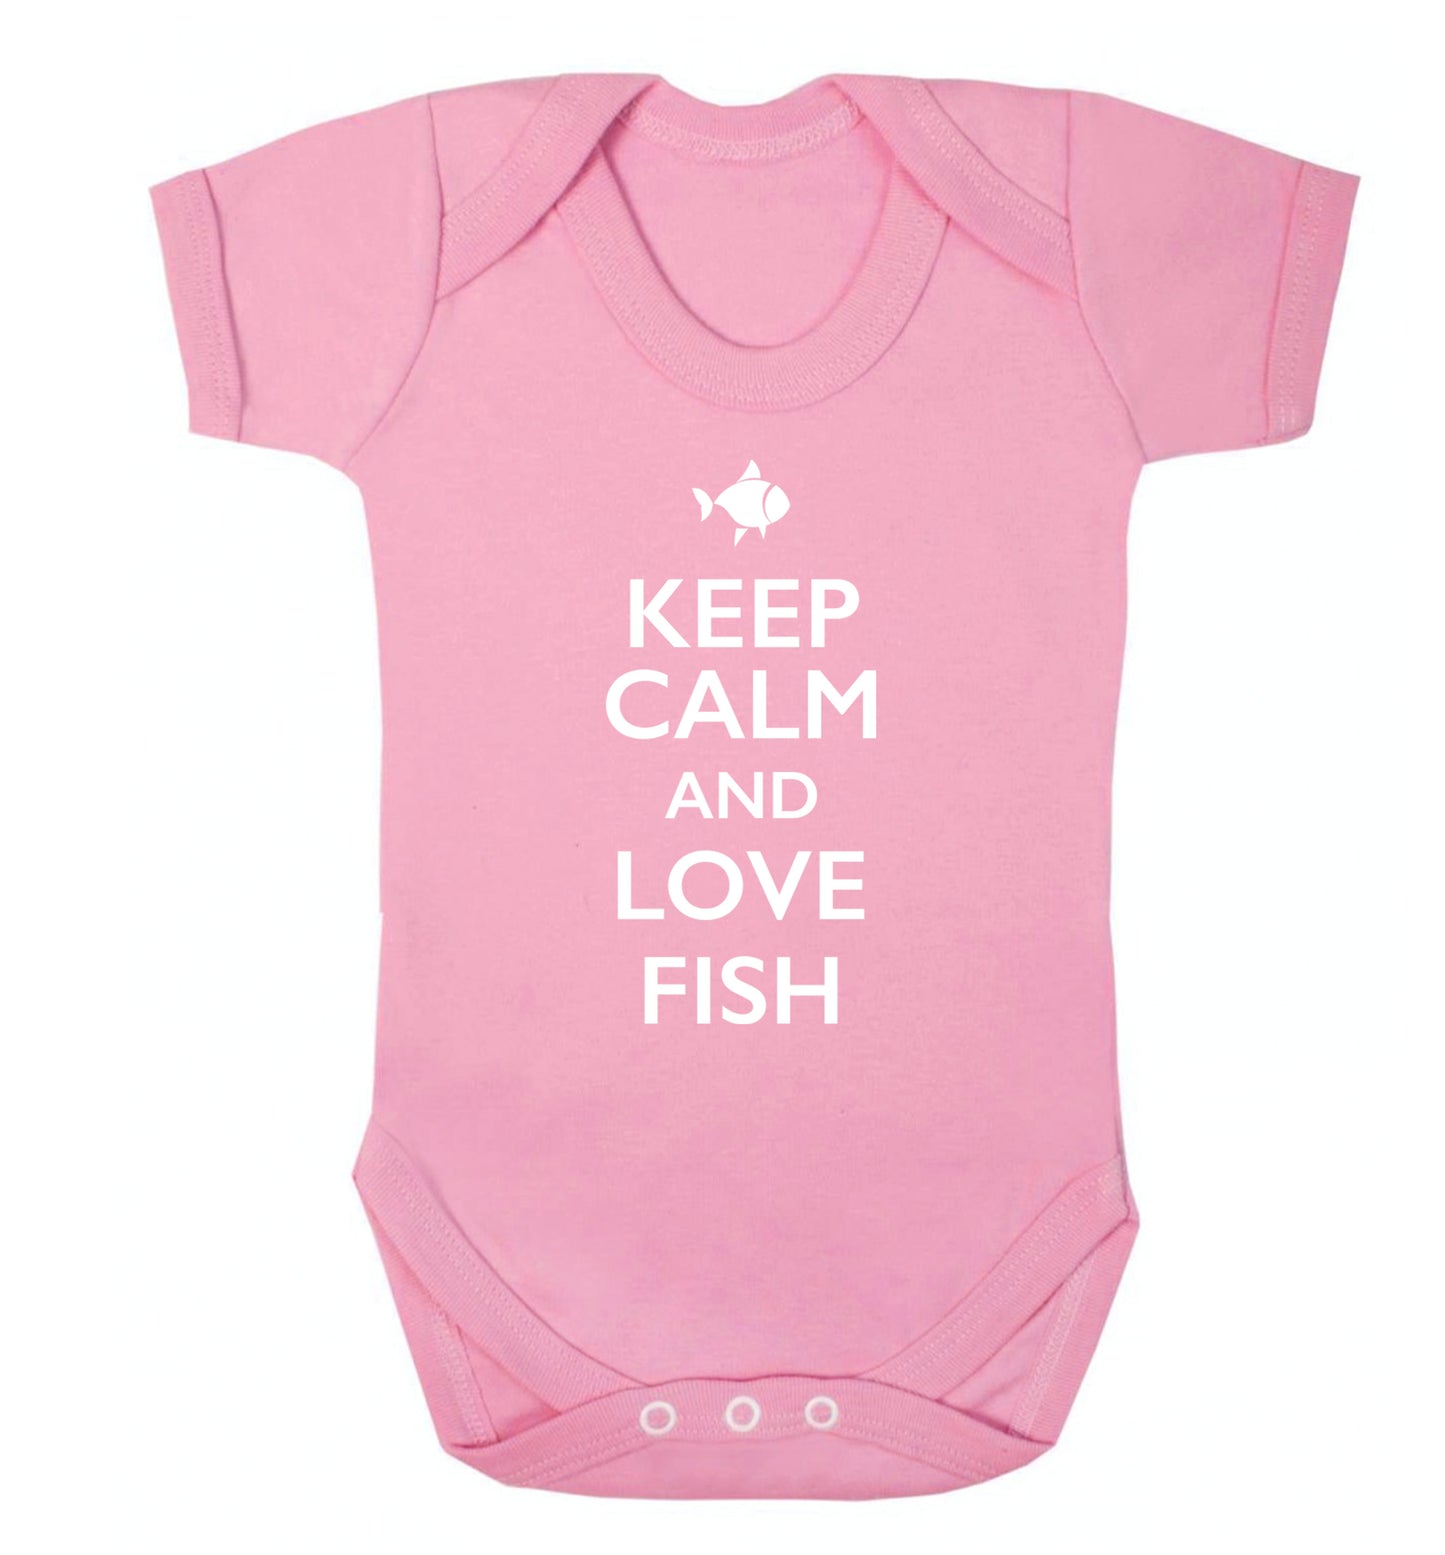 Keep calm and love fish Baby Vest pale pink 18-24 months